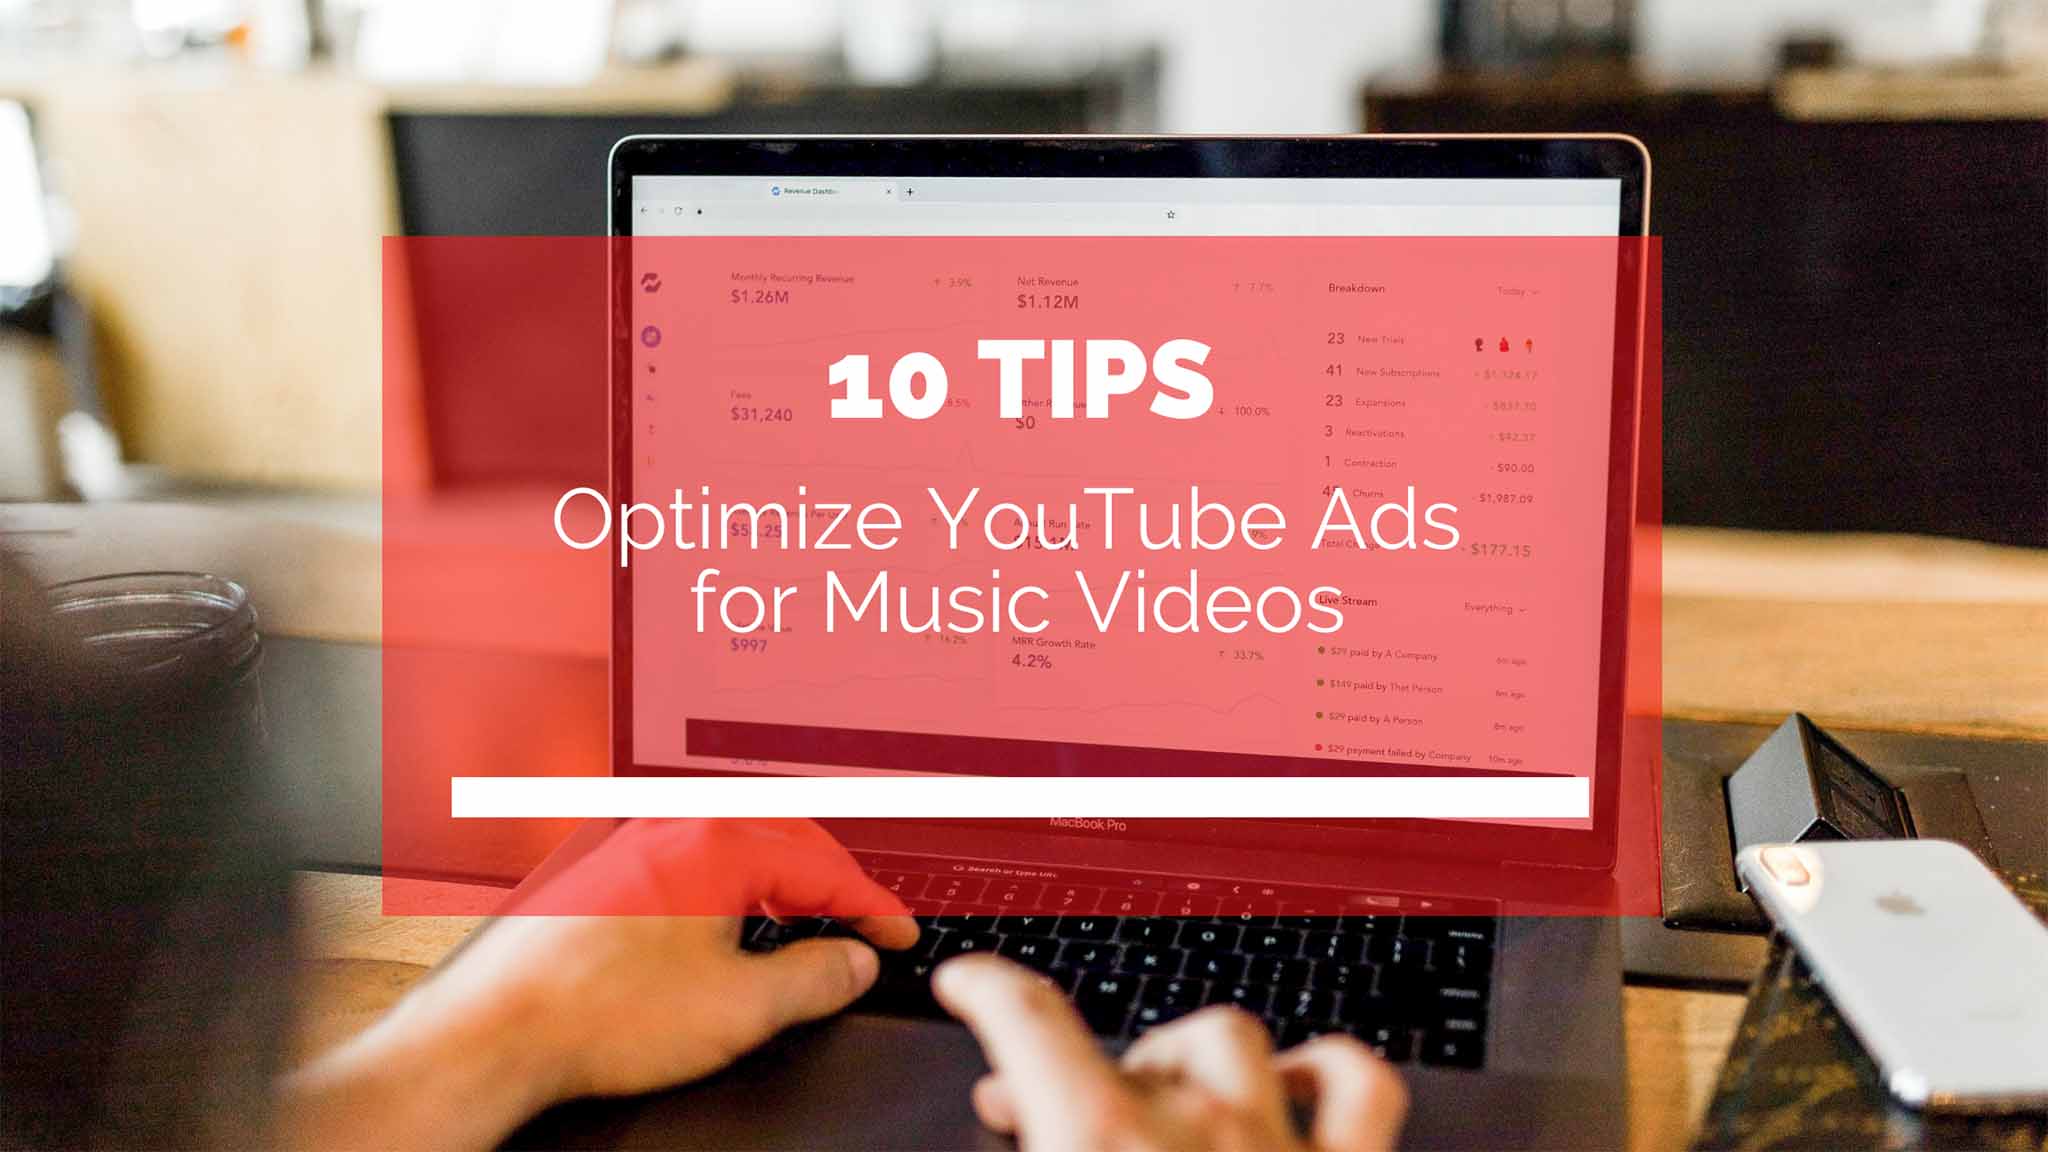 a-laptop-with-title-10-tips-to-optimize-youtube-ads-for-music-videos